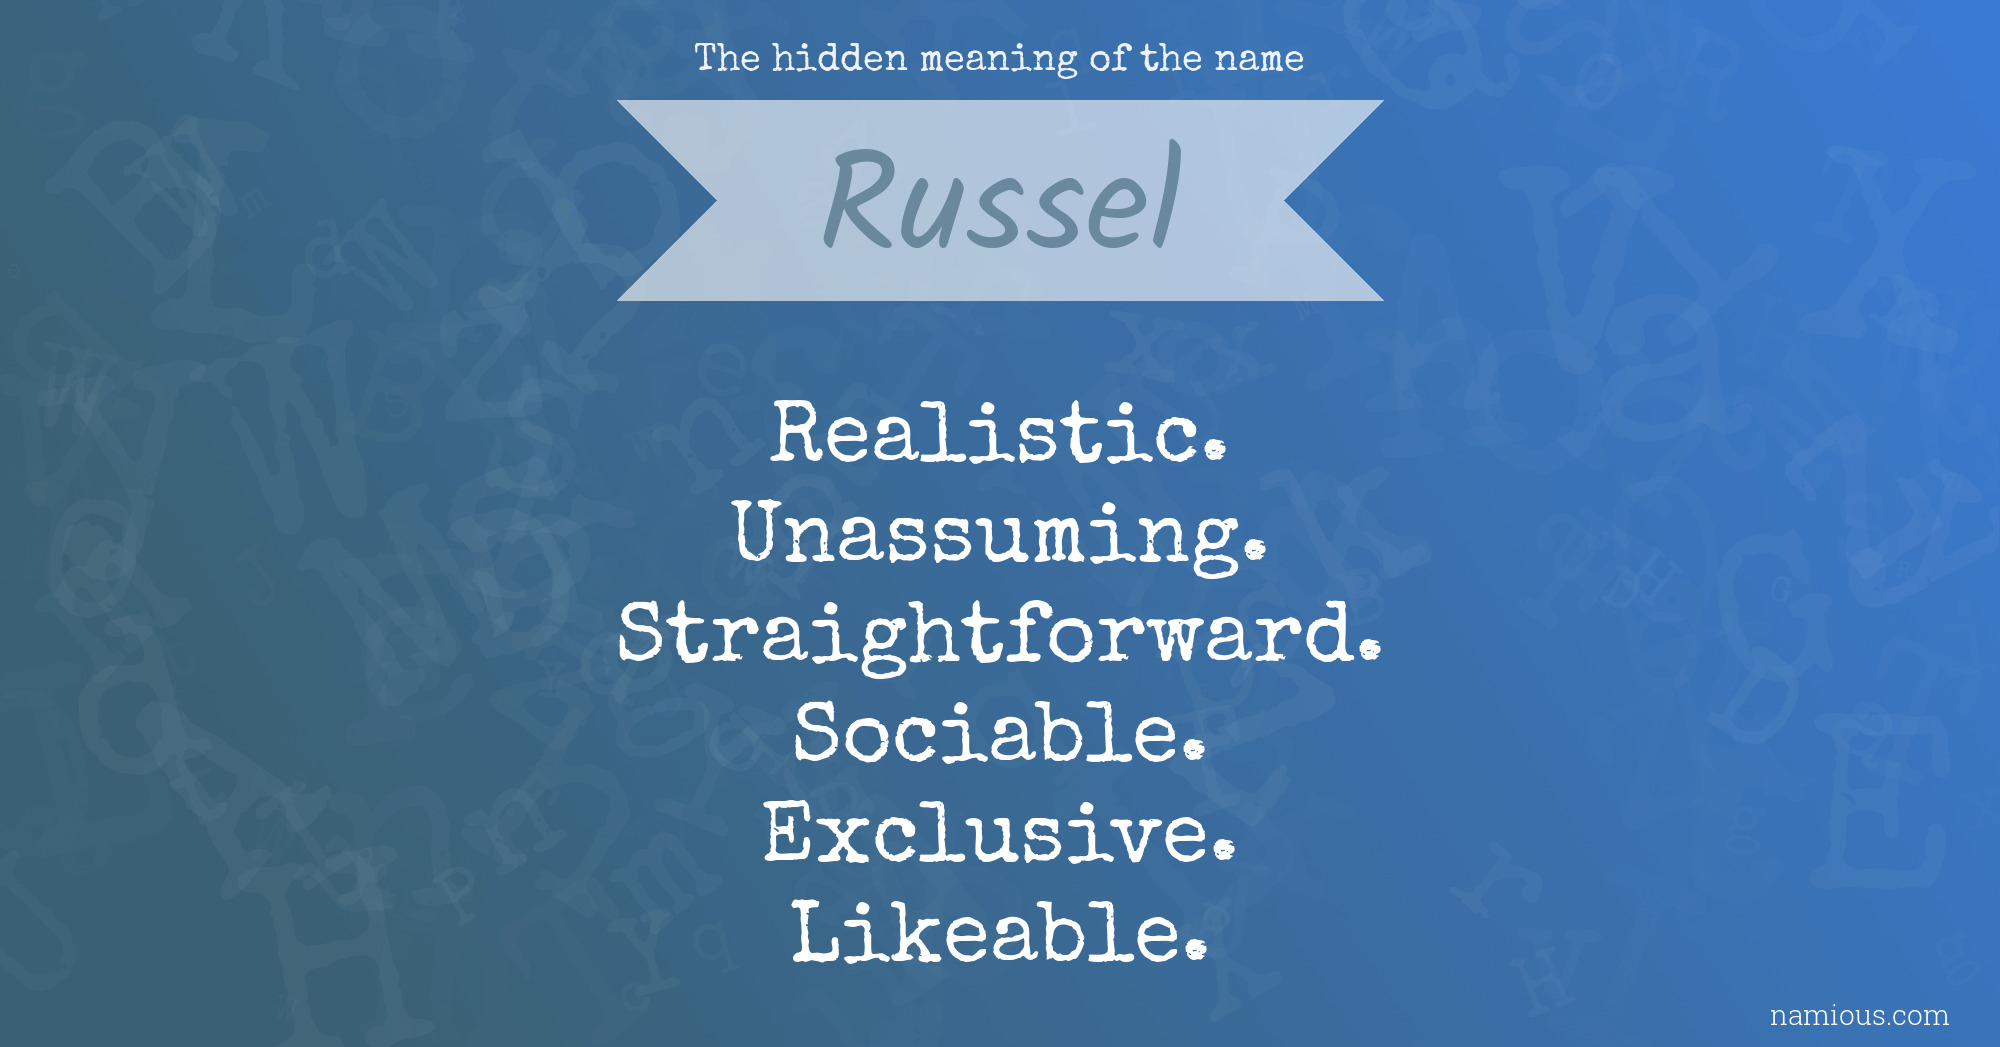 The hidden meaning of the name Russel